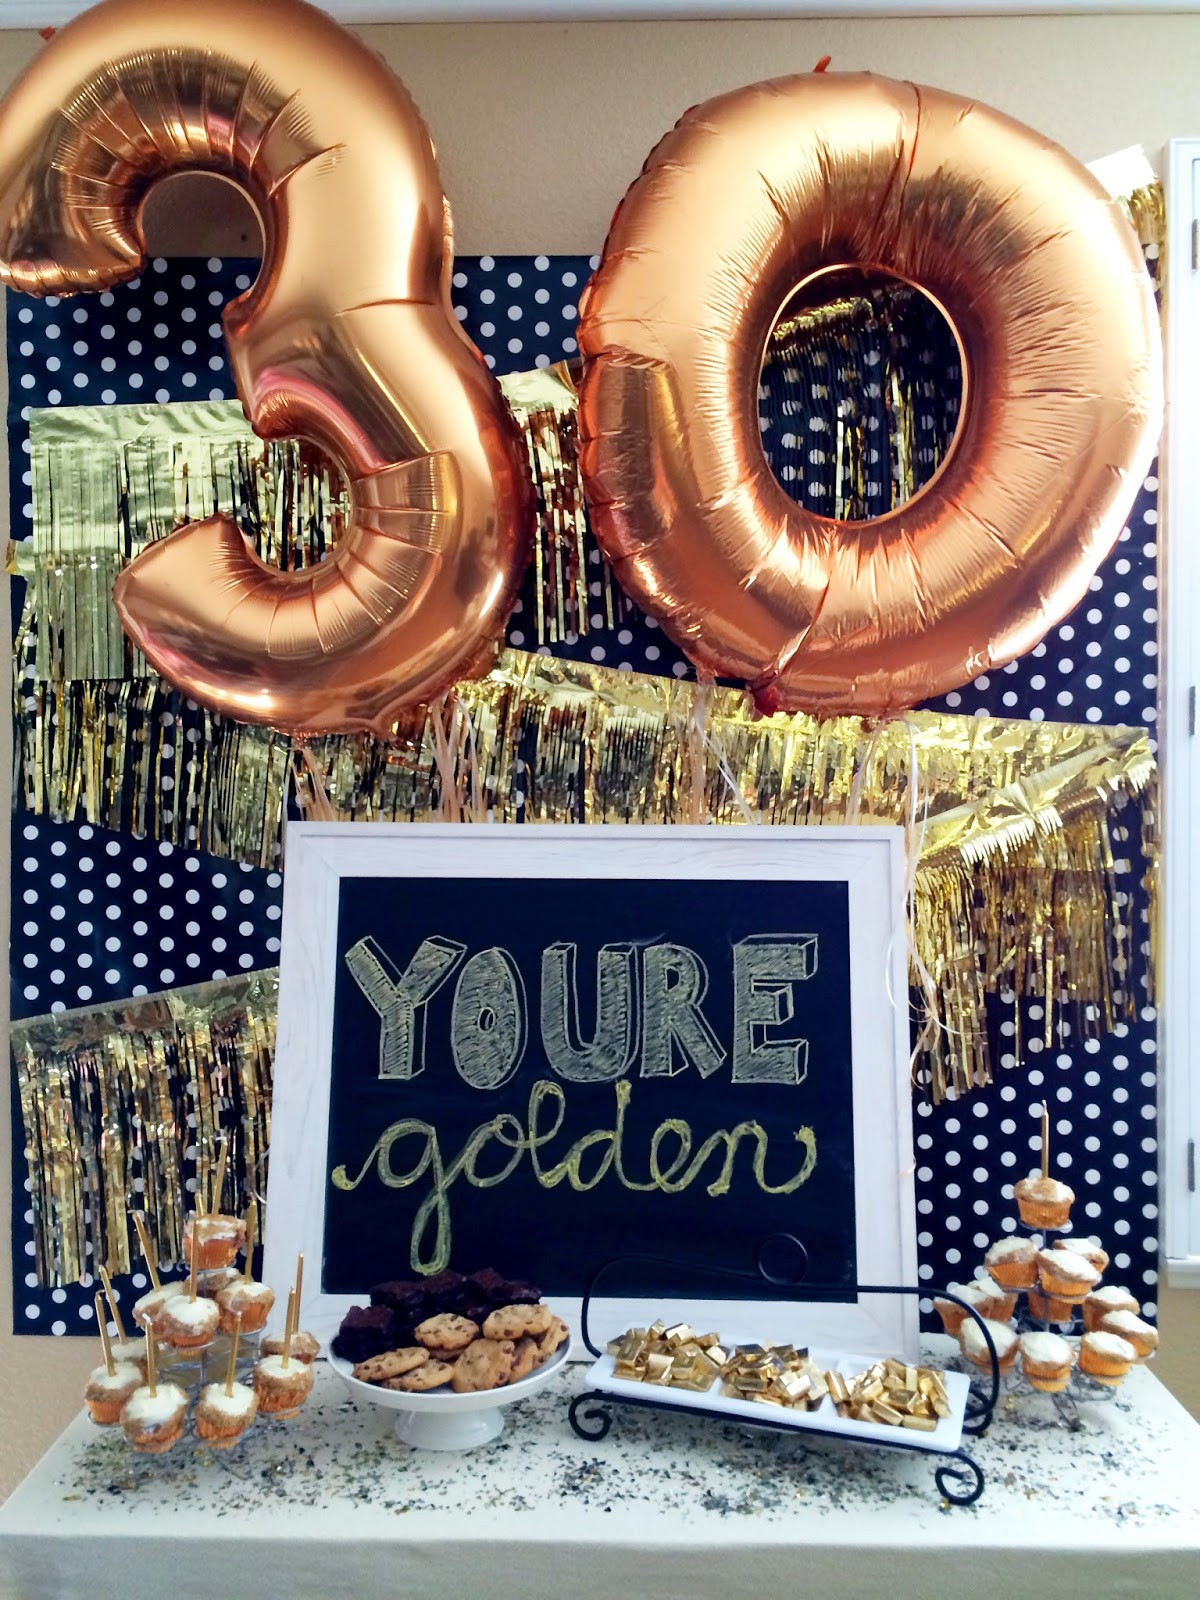 30 Year Old Birthday Party Ideas
 7 Clever Themes for a Smashing 30th Birthday Party